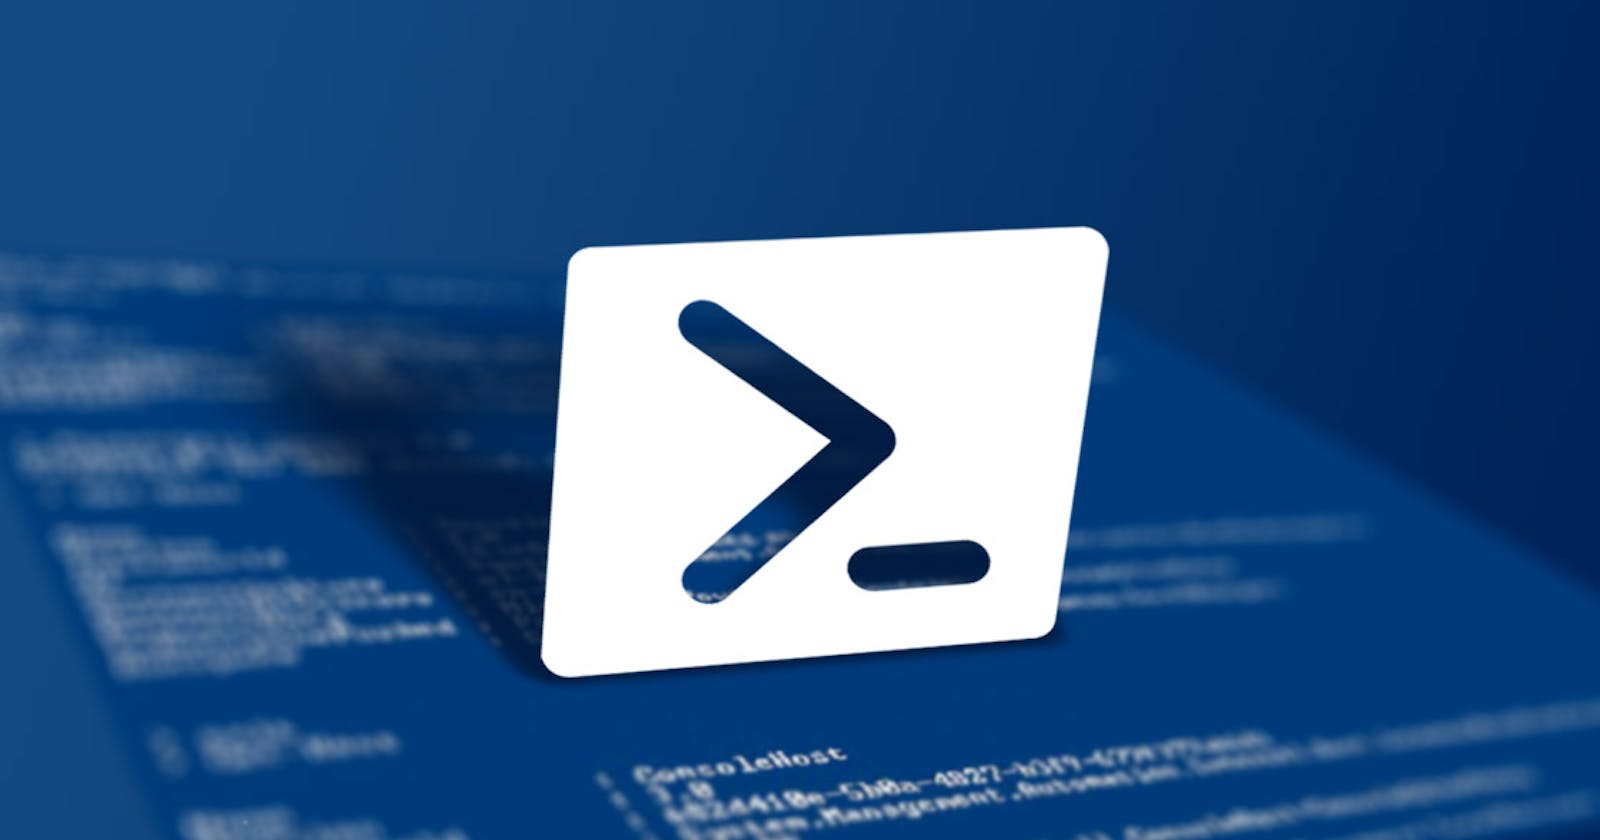 Getting Started with PowerShell: Your First Script